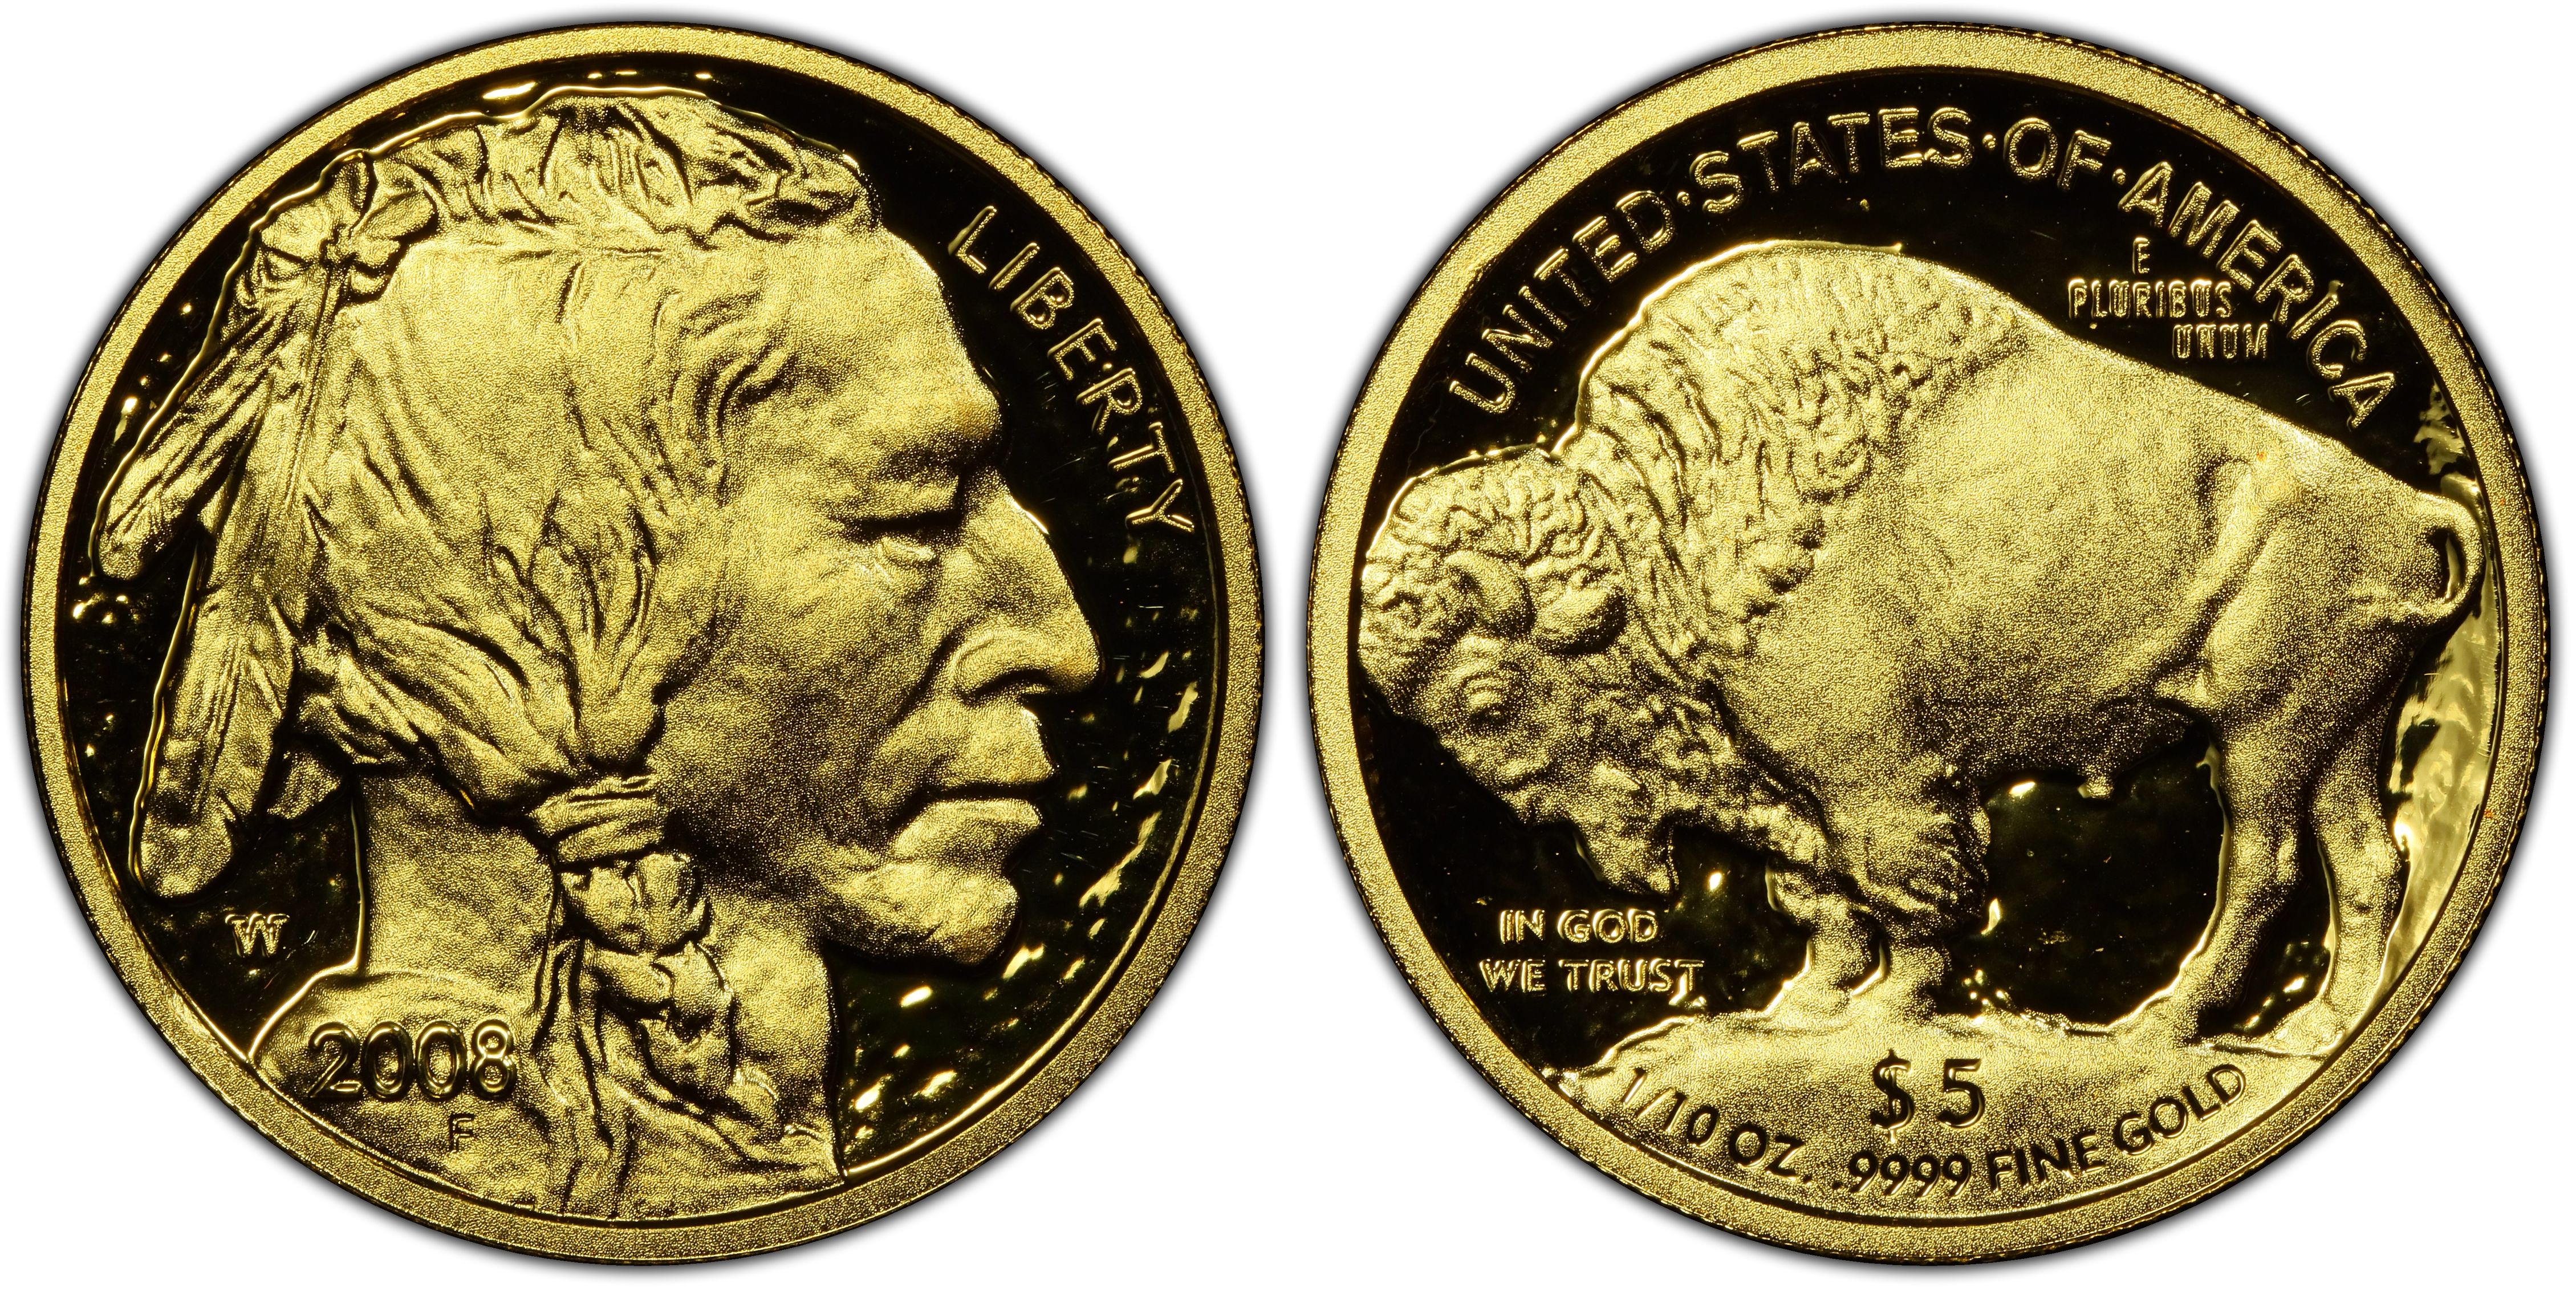 Buy .9999 Pure Gold with the $5 Gold American Eagle Bullion